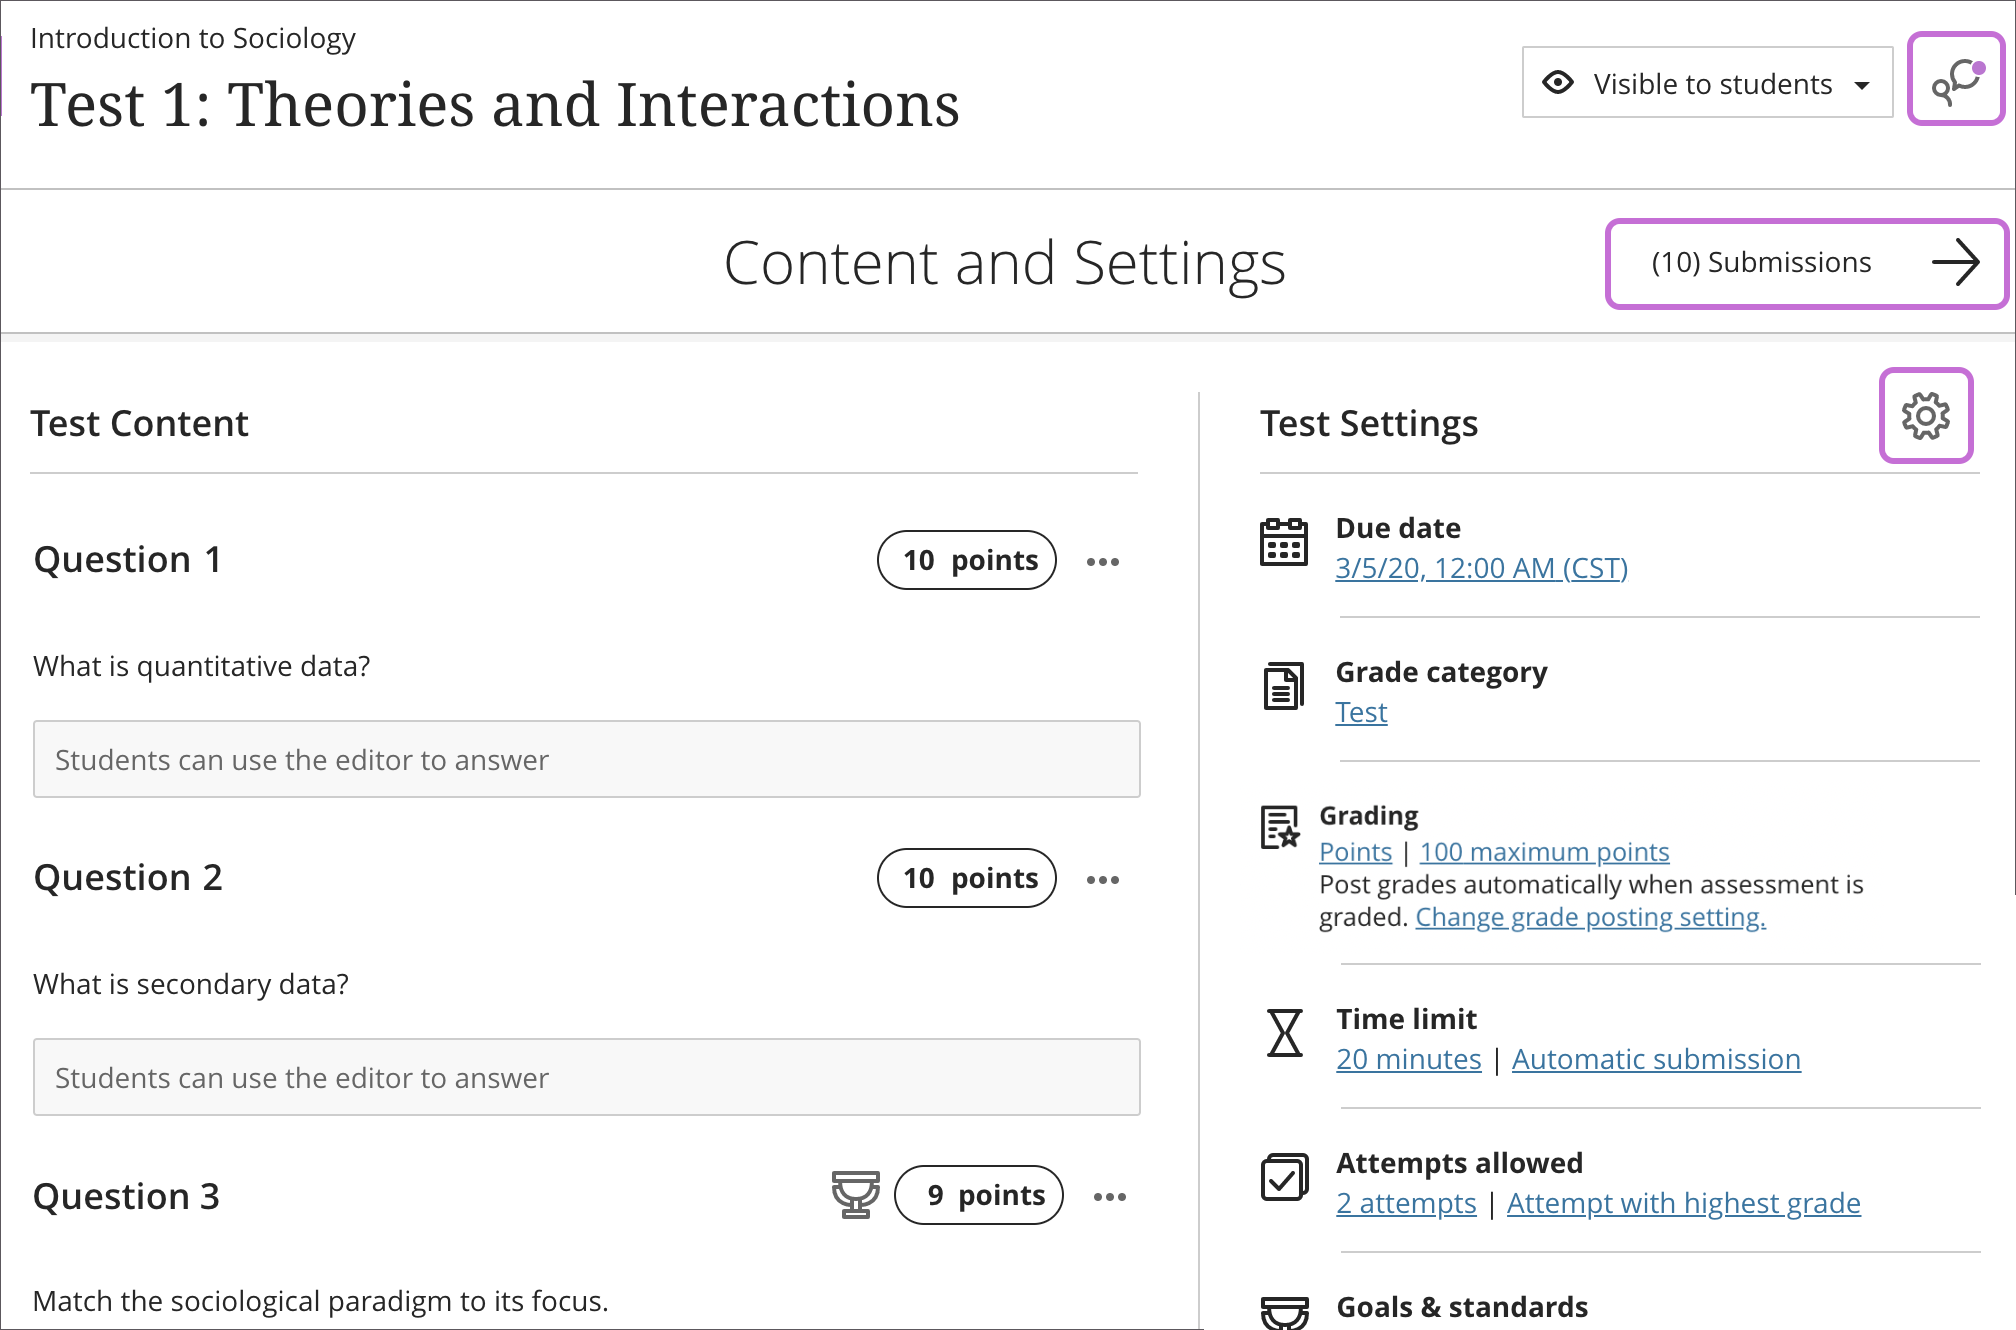 Test content and settings page